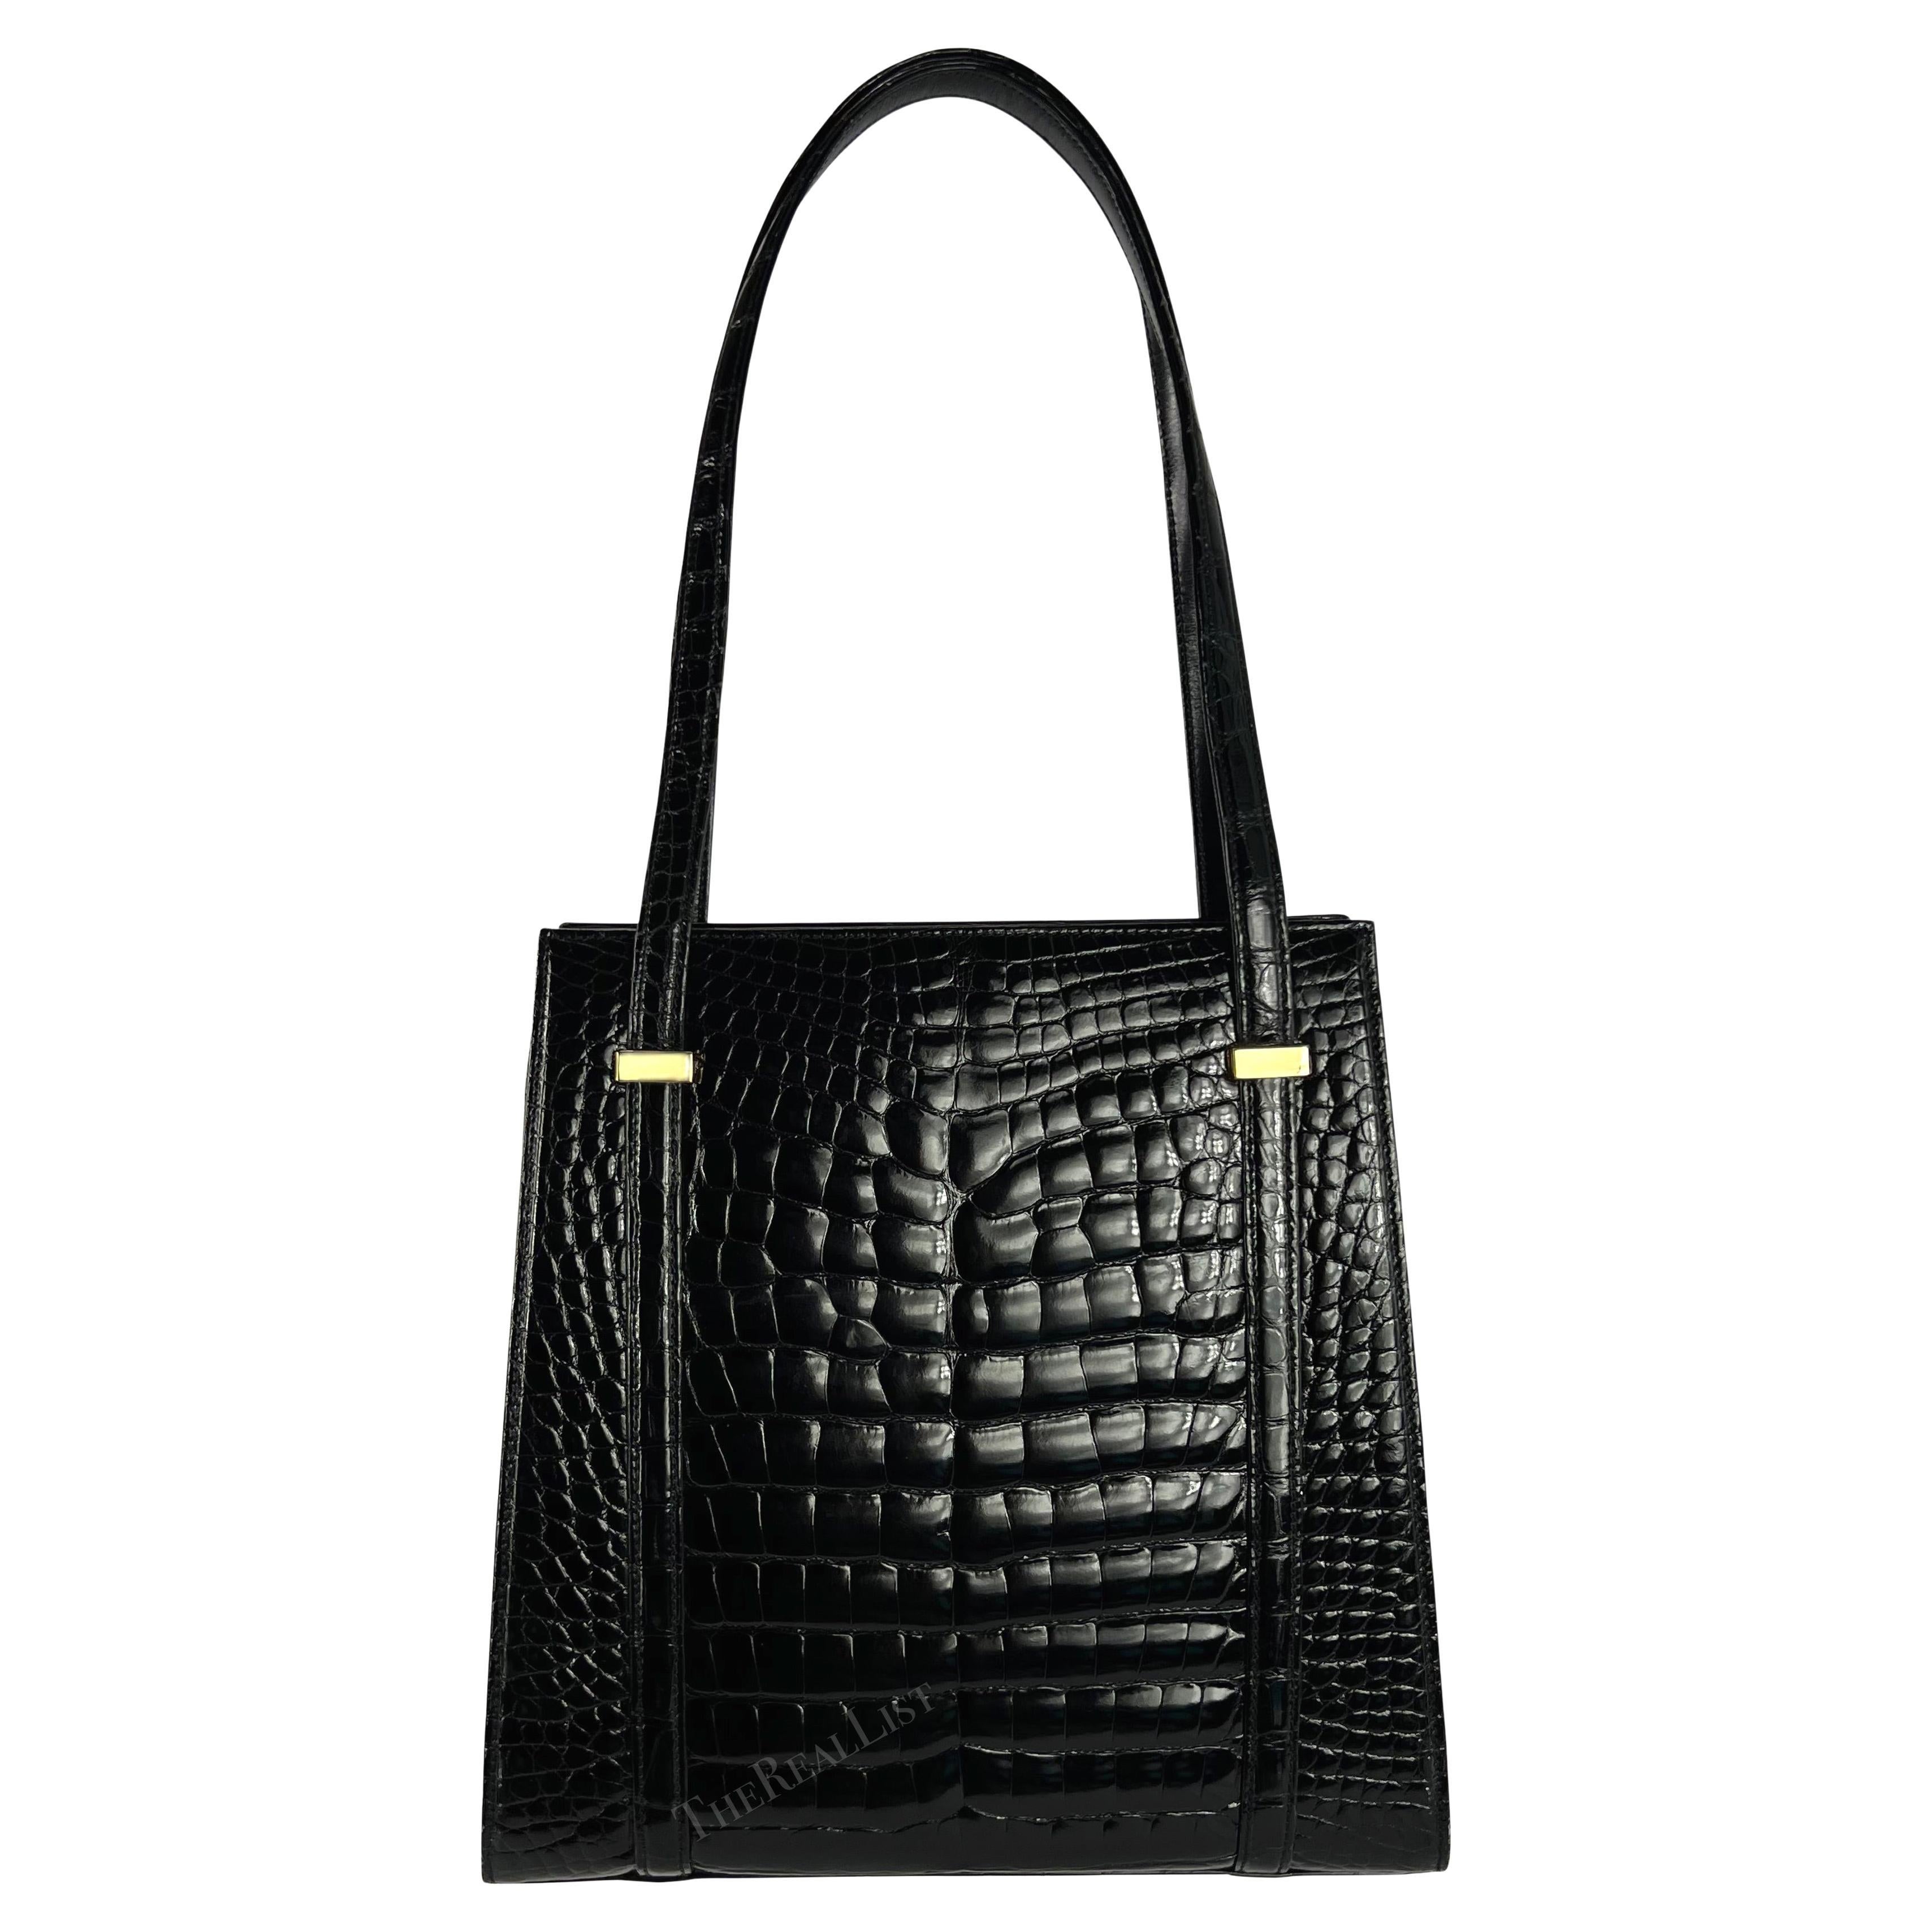 F/W 1996 Gucci by Tom Ford Large Black Glossy Crocodile Shoulder Bag In Excellent Condition For Sale In West Hollywood, CA